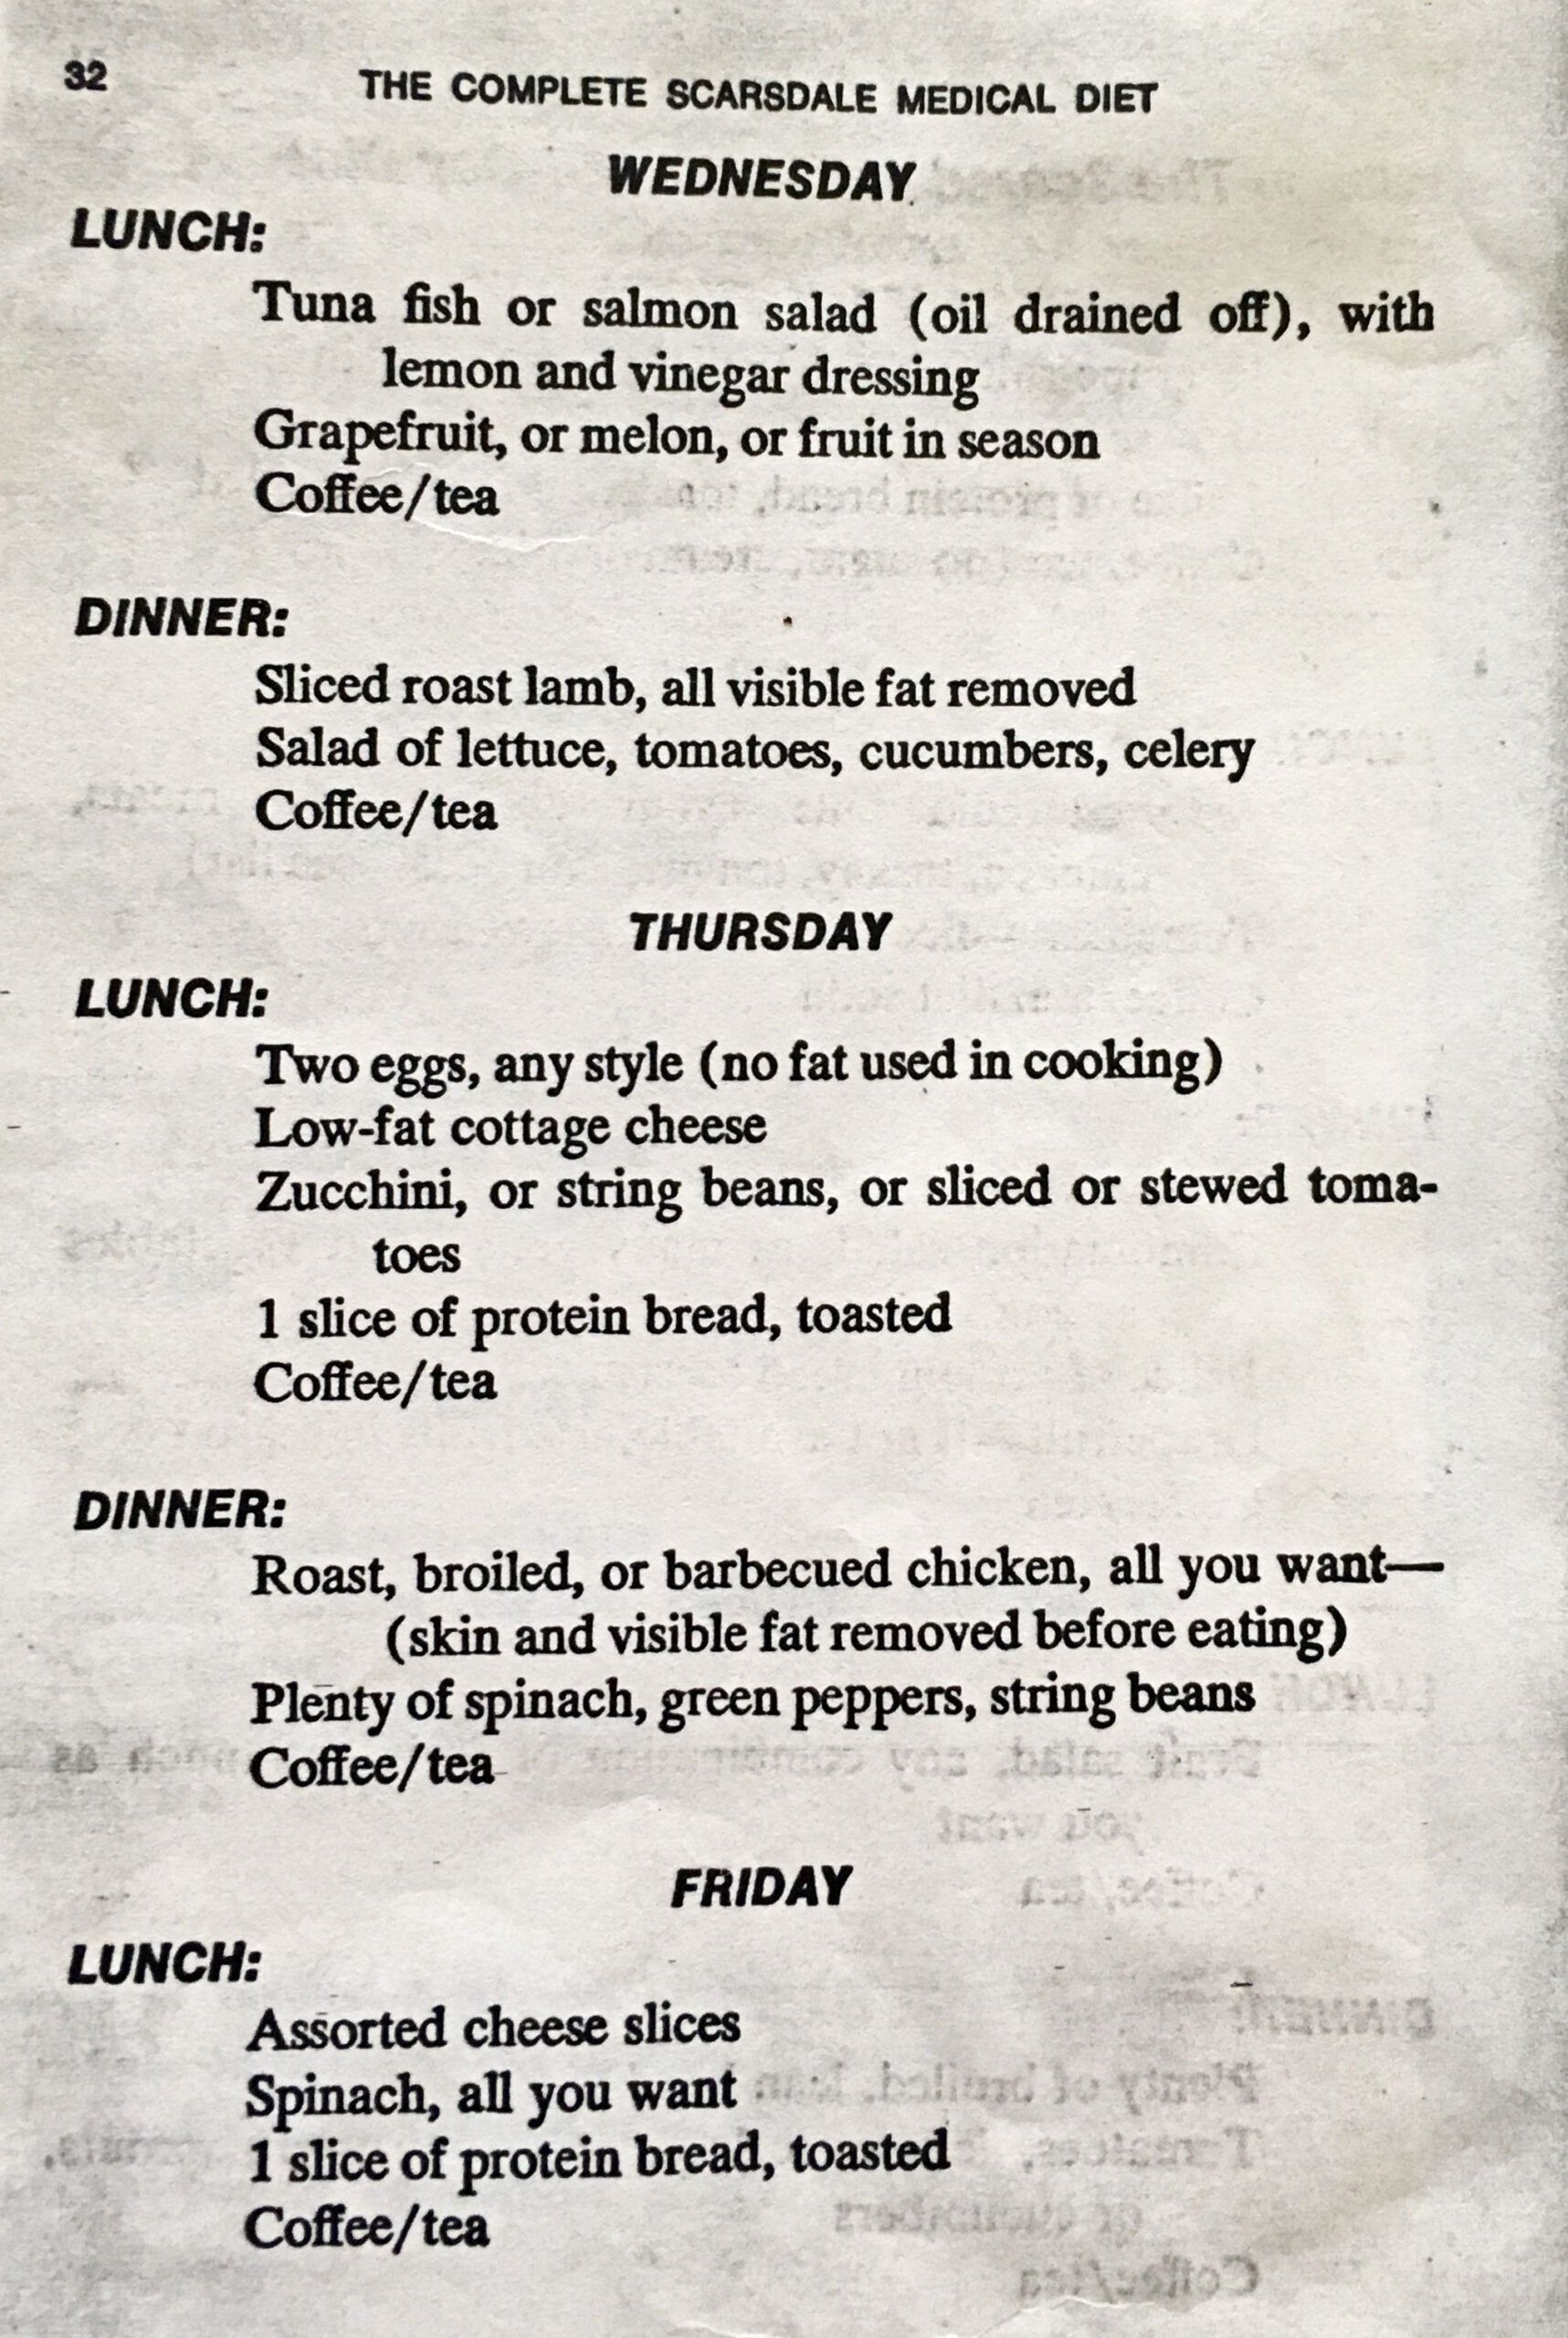 Scarsdale 14 day Diet Page 2 Of 4 14 Day Diet 